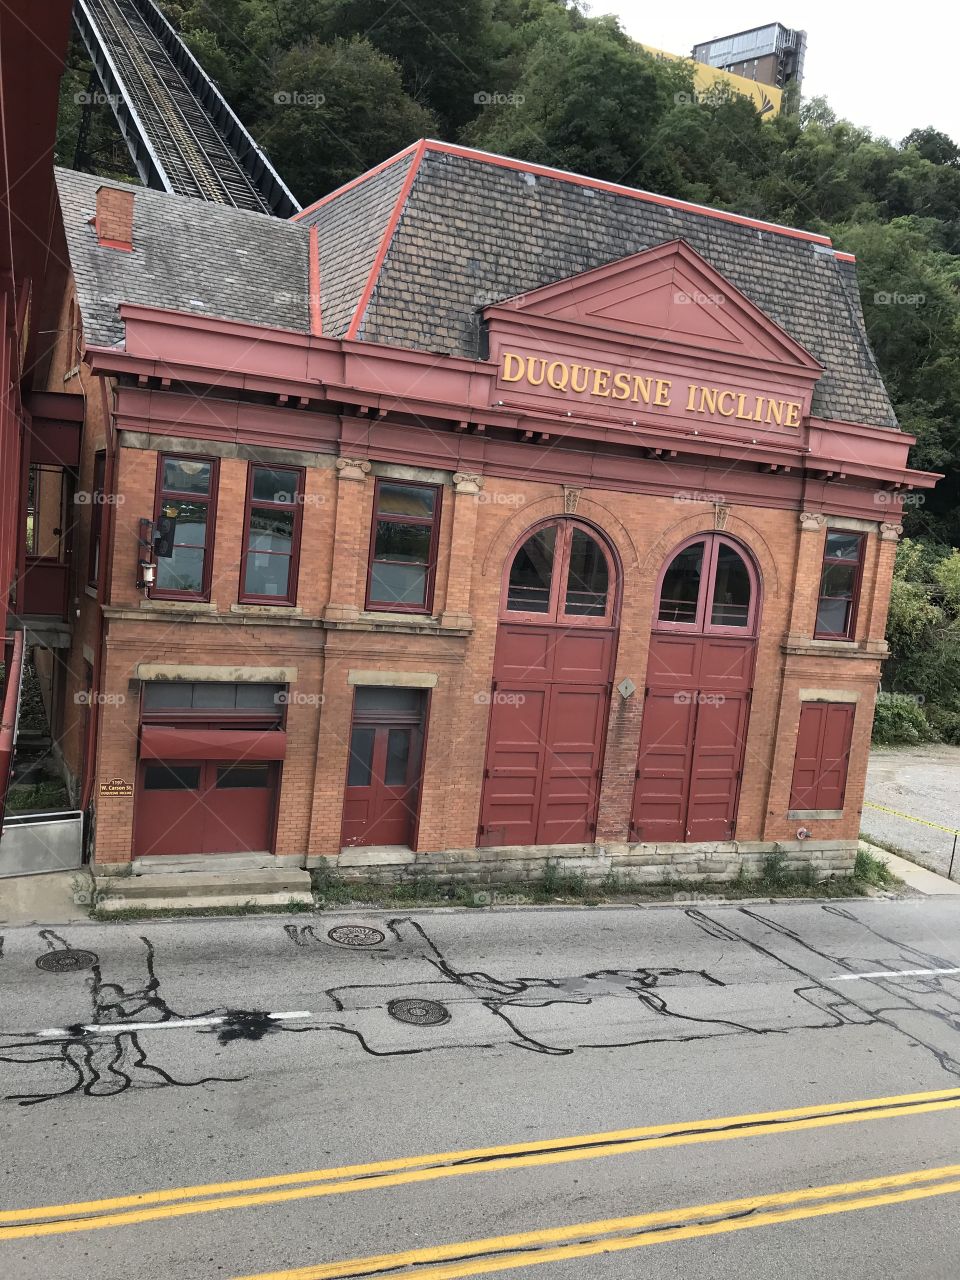 Duquesne incline, Pittsburgh